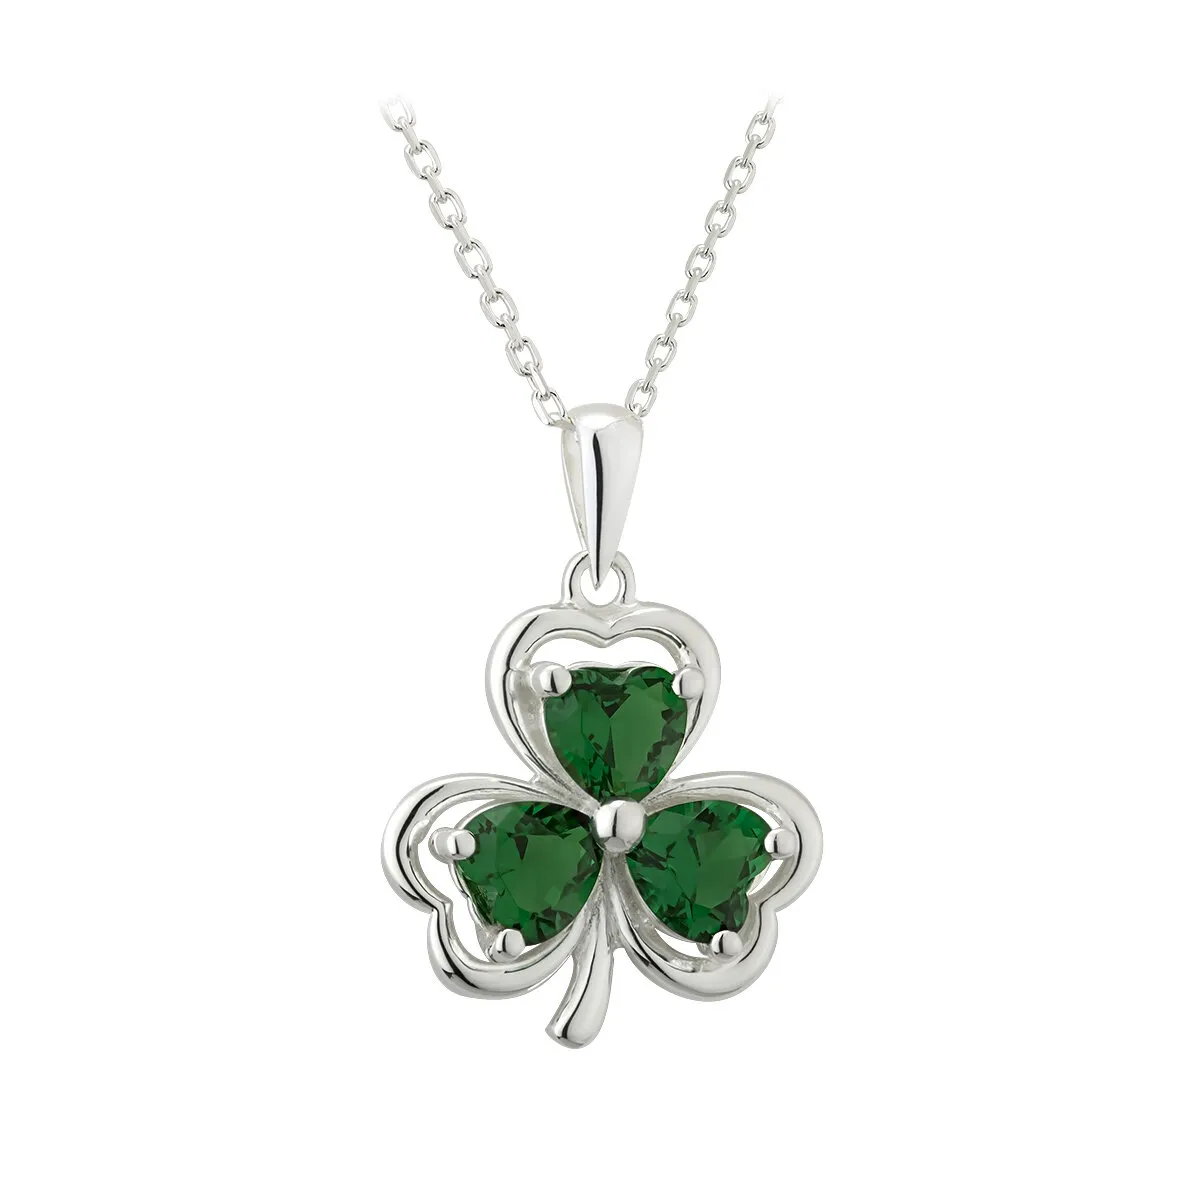 Silver Shamrock Necklace With Green Crystals...